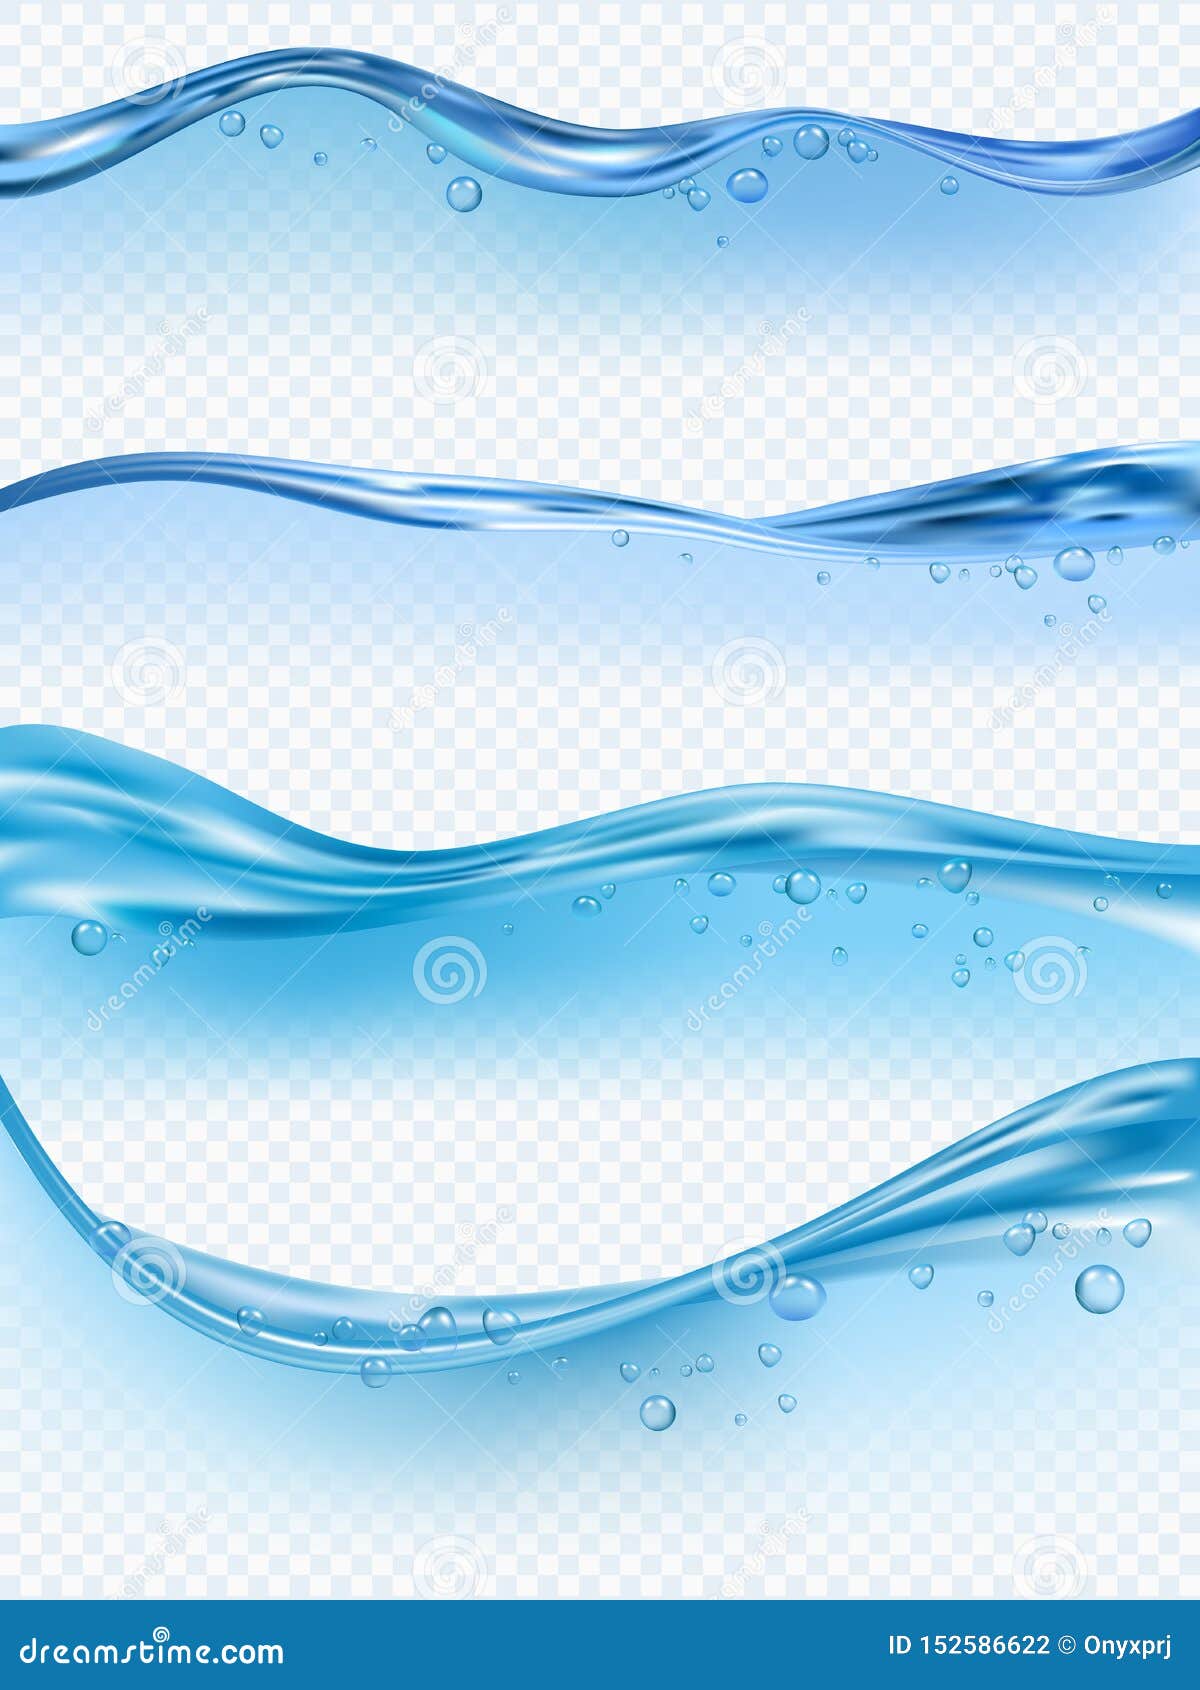 wave realistic. water splashes liquid surface with bubbles transparent aqua flowing  wave pictures